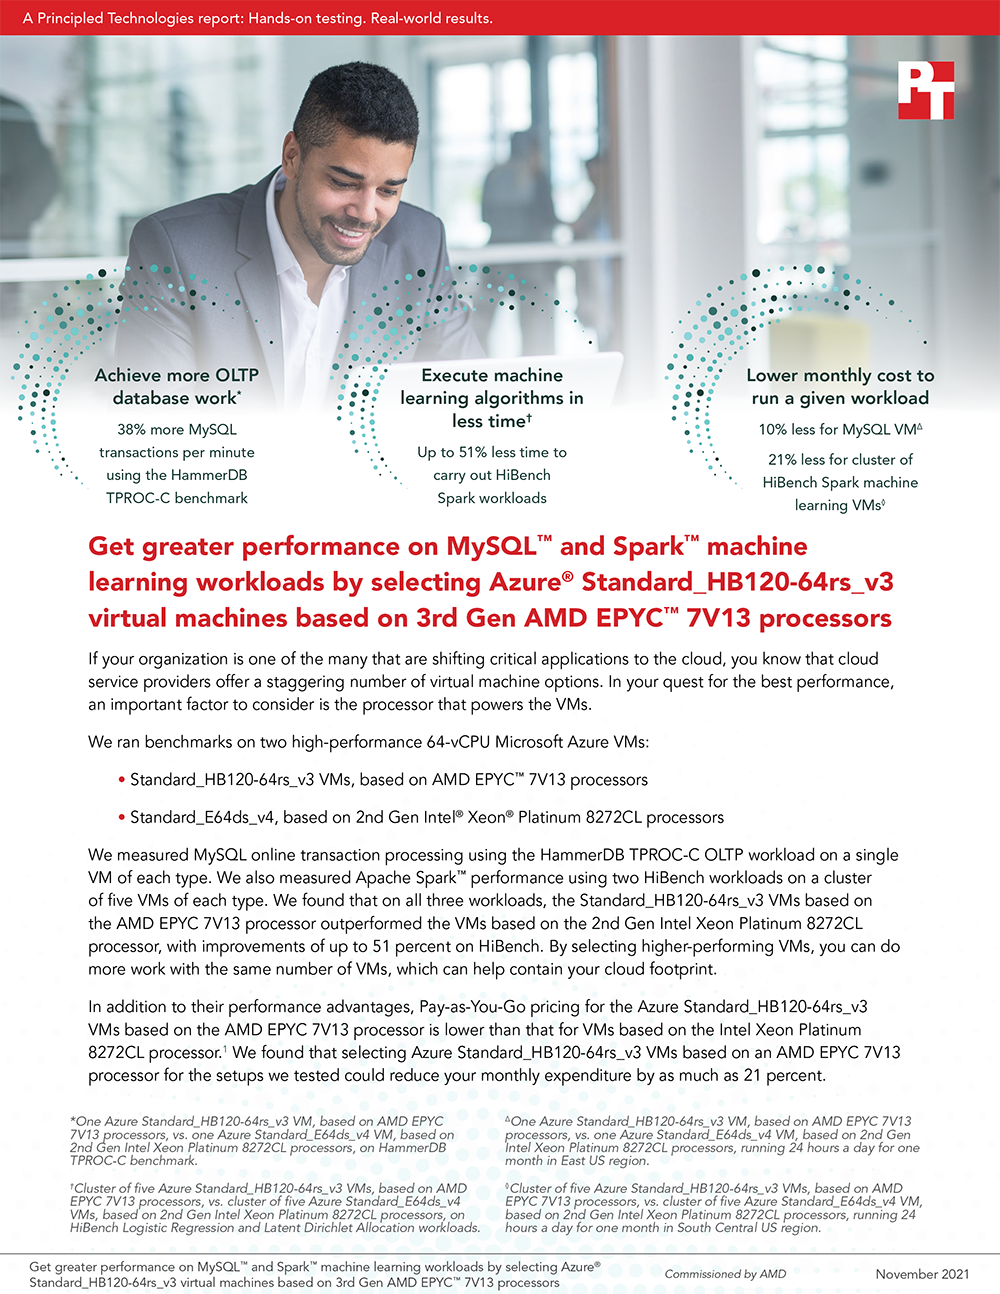 Azure Virtual Machines Based on 3rd Gen  AMD EPYC 7V13 Processors Delivered Greater Performance on MySQL and Spark Machine Learning Workloads at a Lower Cost